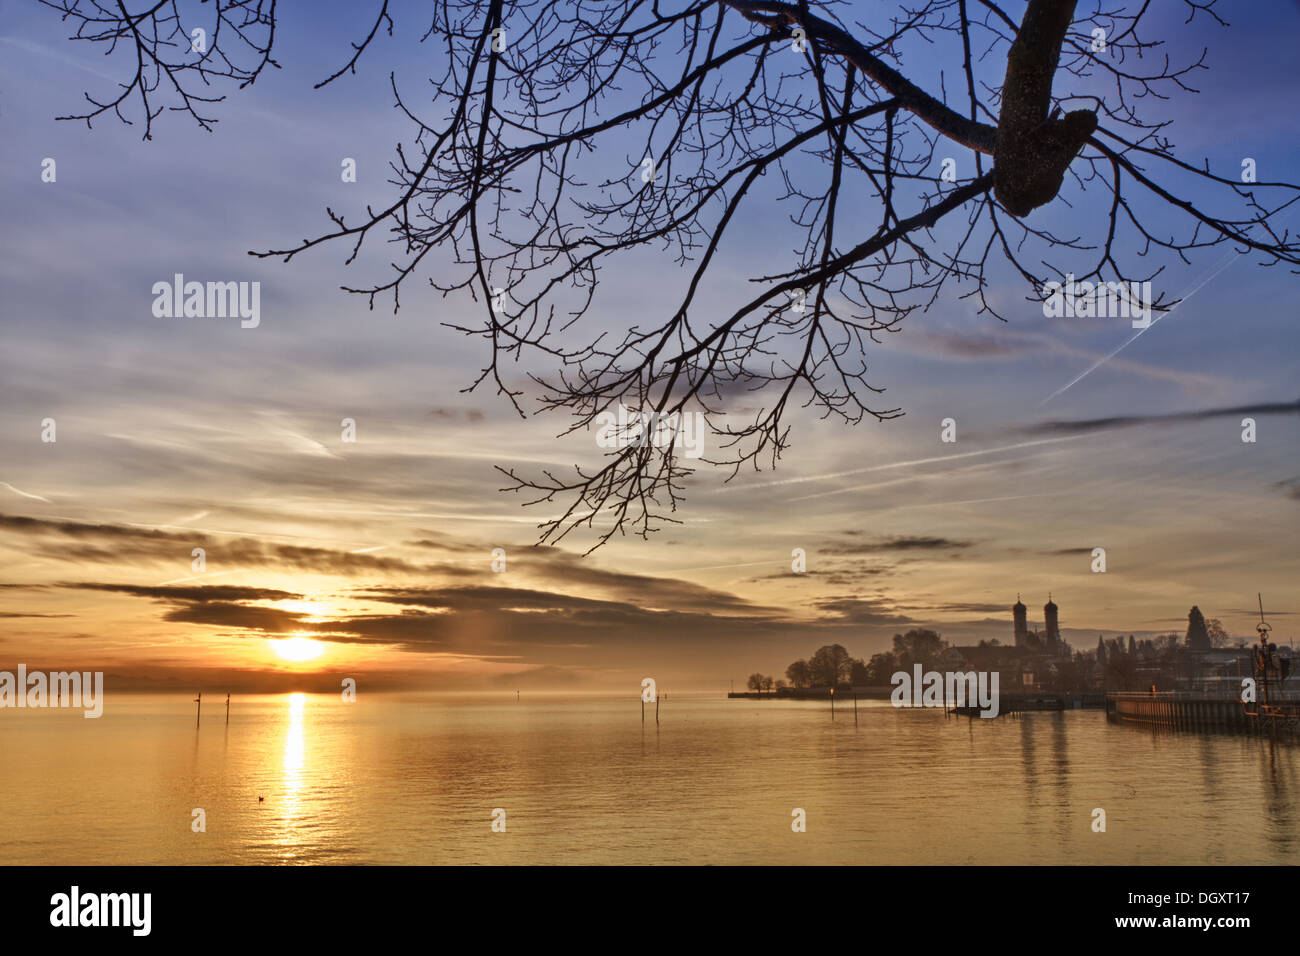 Bodensee (Lake Constance) with Schlosskirche (church) of Friedrichshafen at sunset, Germany Stock Photo